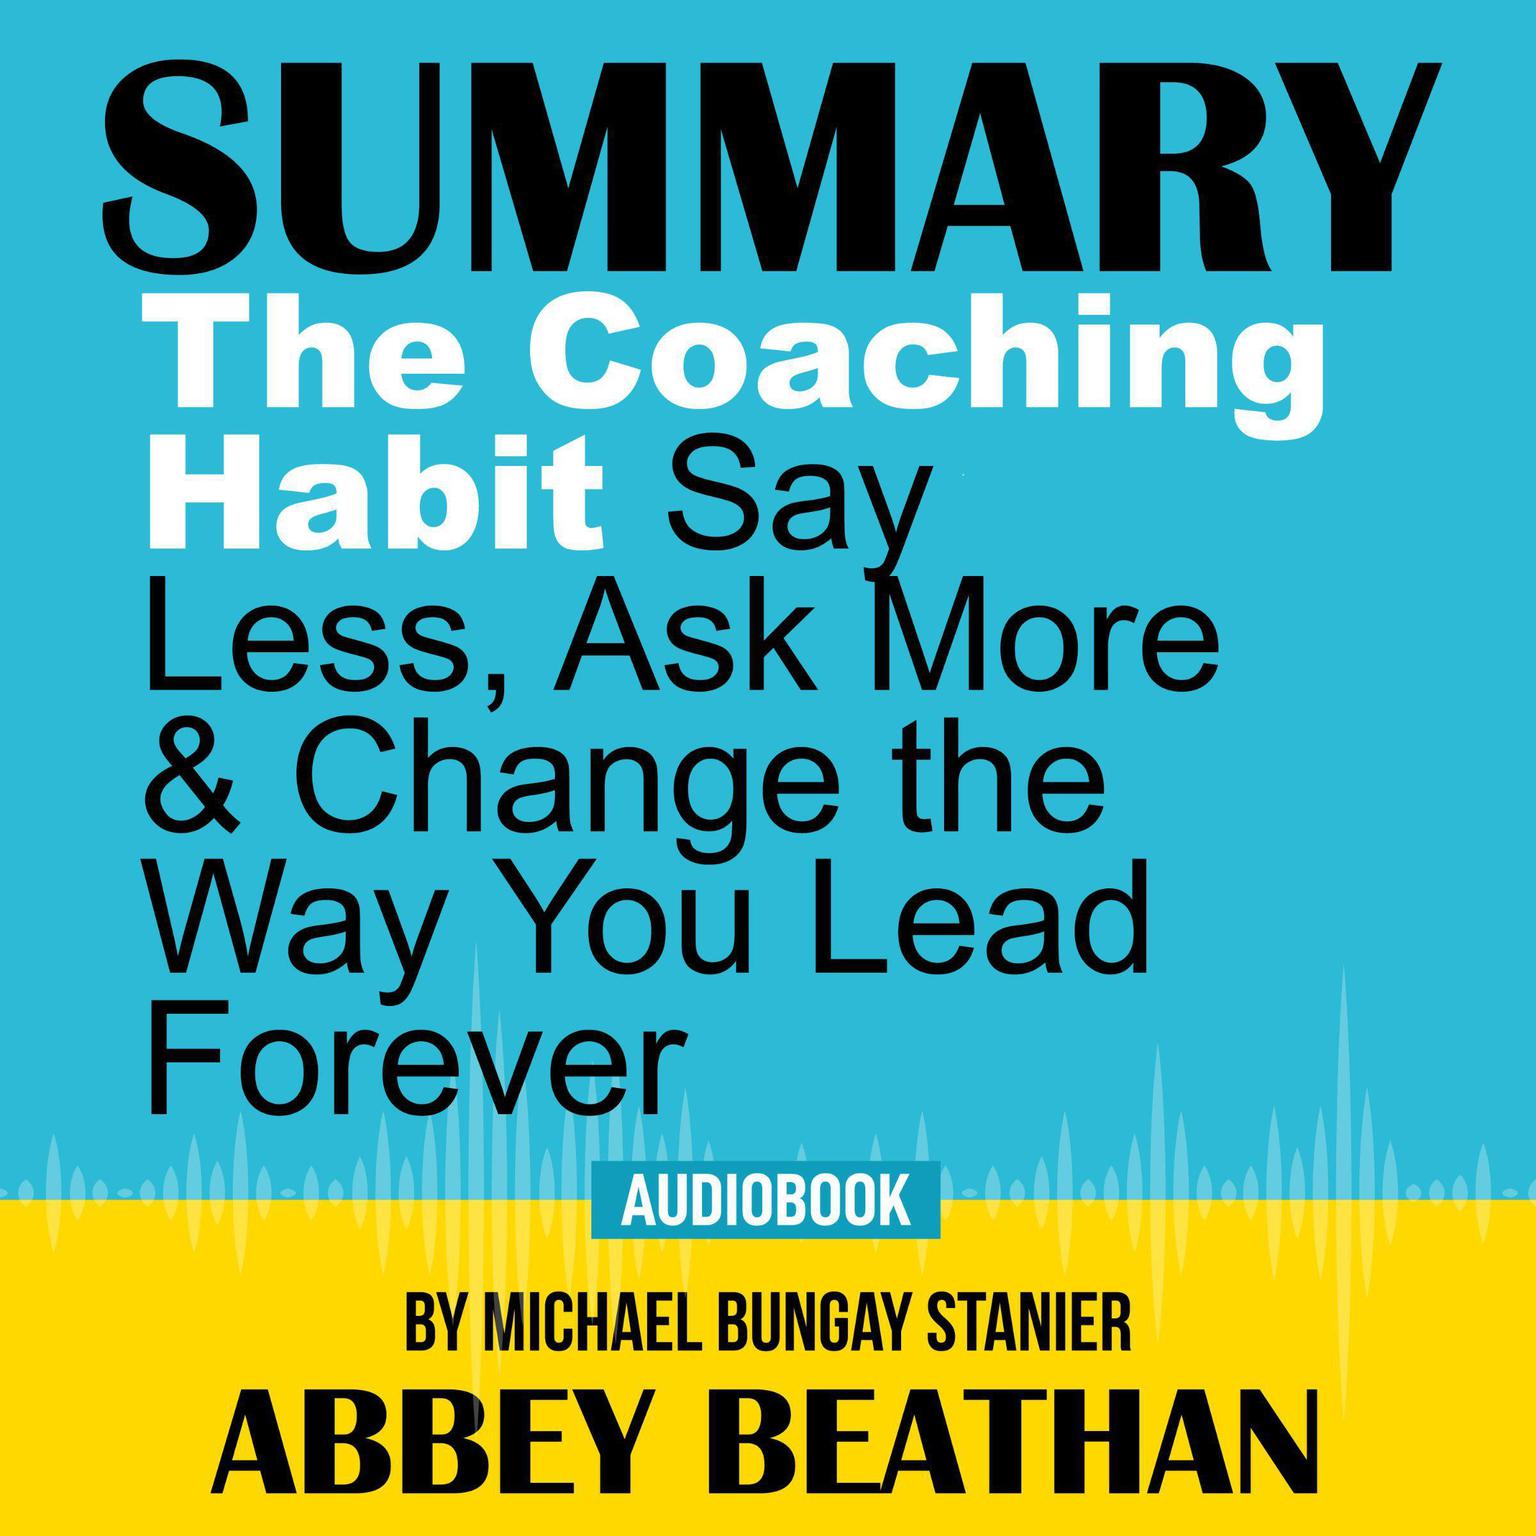 Summary of The Coaching Habit: Say Less, Ask More & Change the Way You Lead Forever by Michael Bungay Stanier Audiobook, by Abbey Beathan